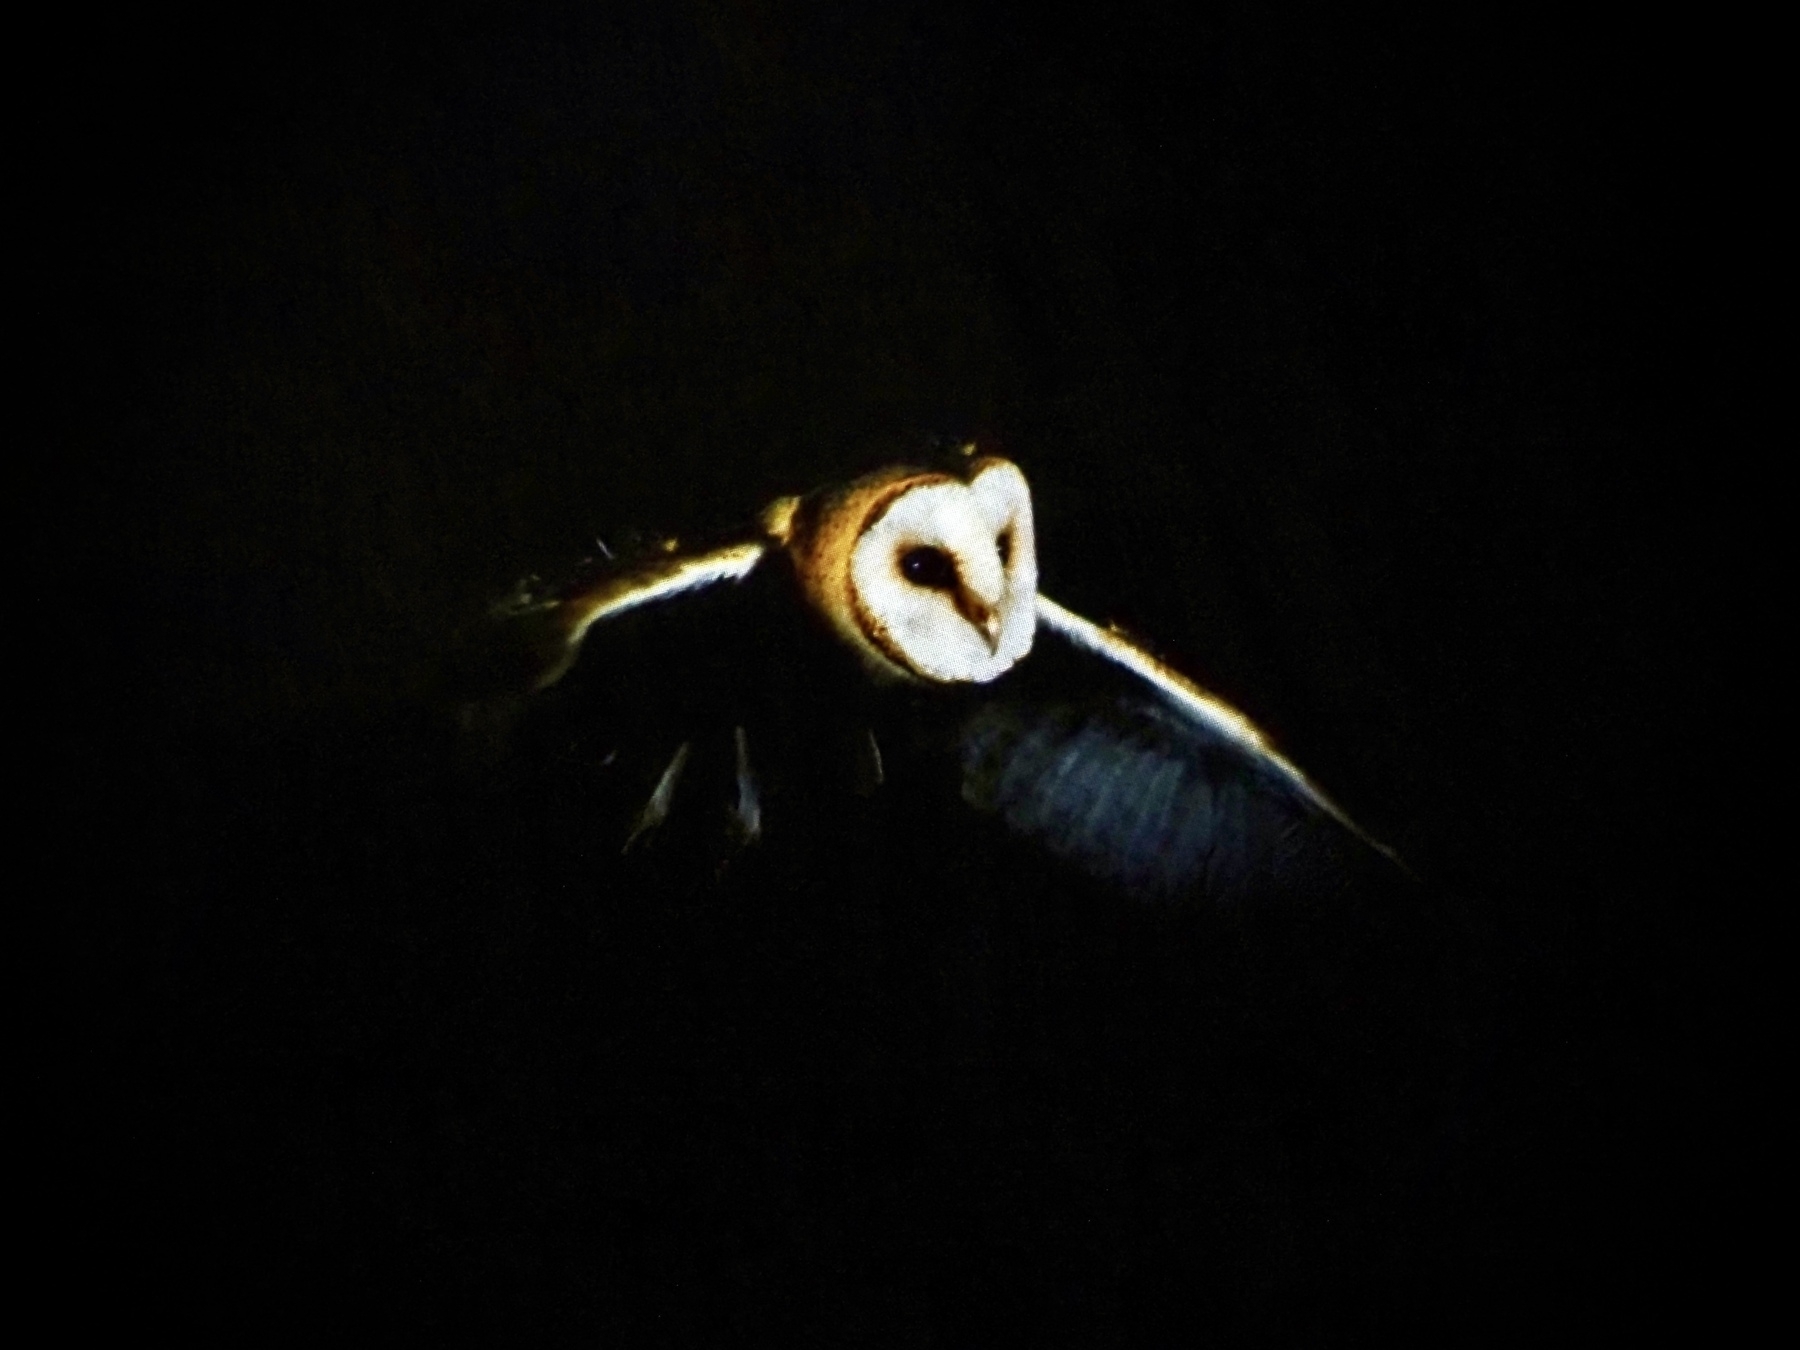 An owl swoops out of the darkness on a digital display.